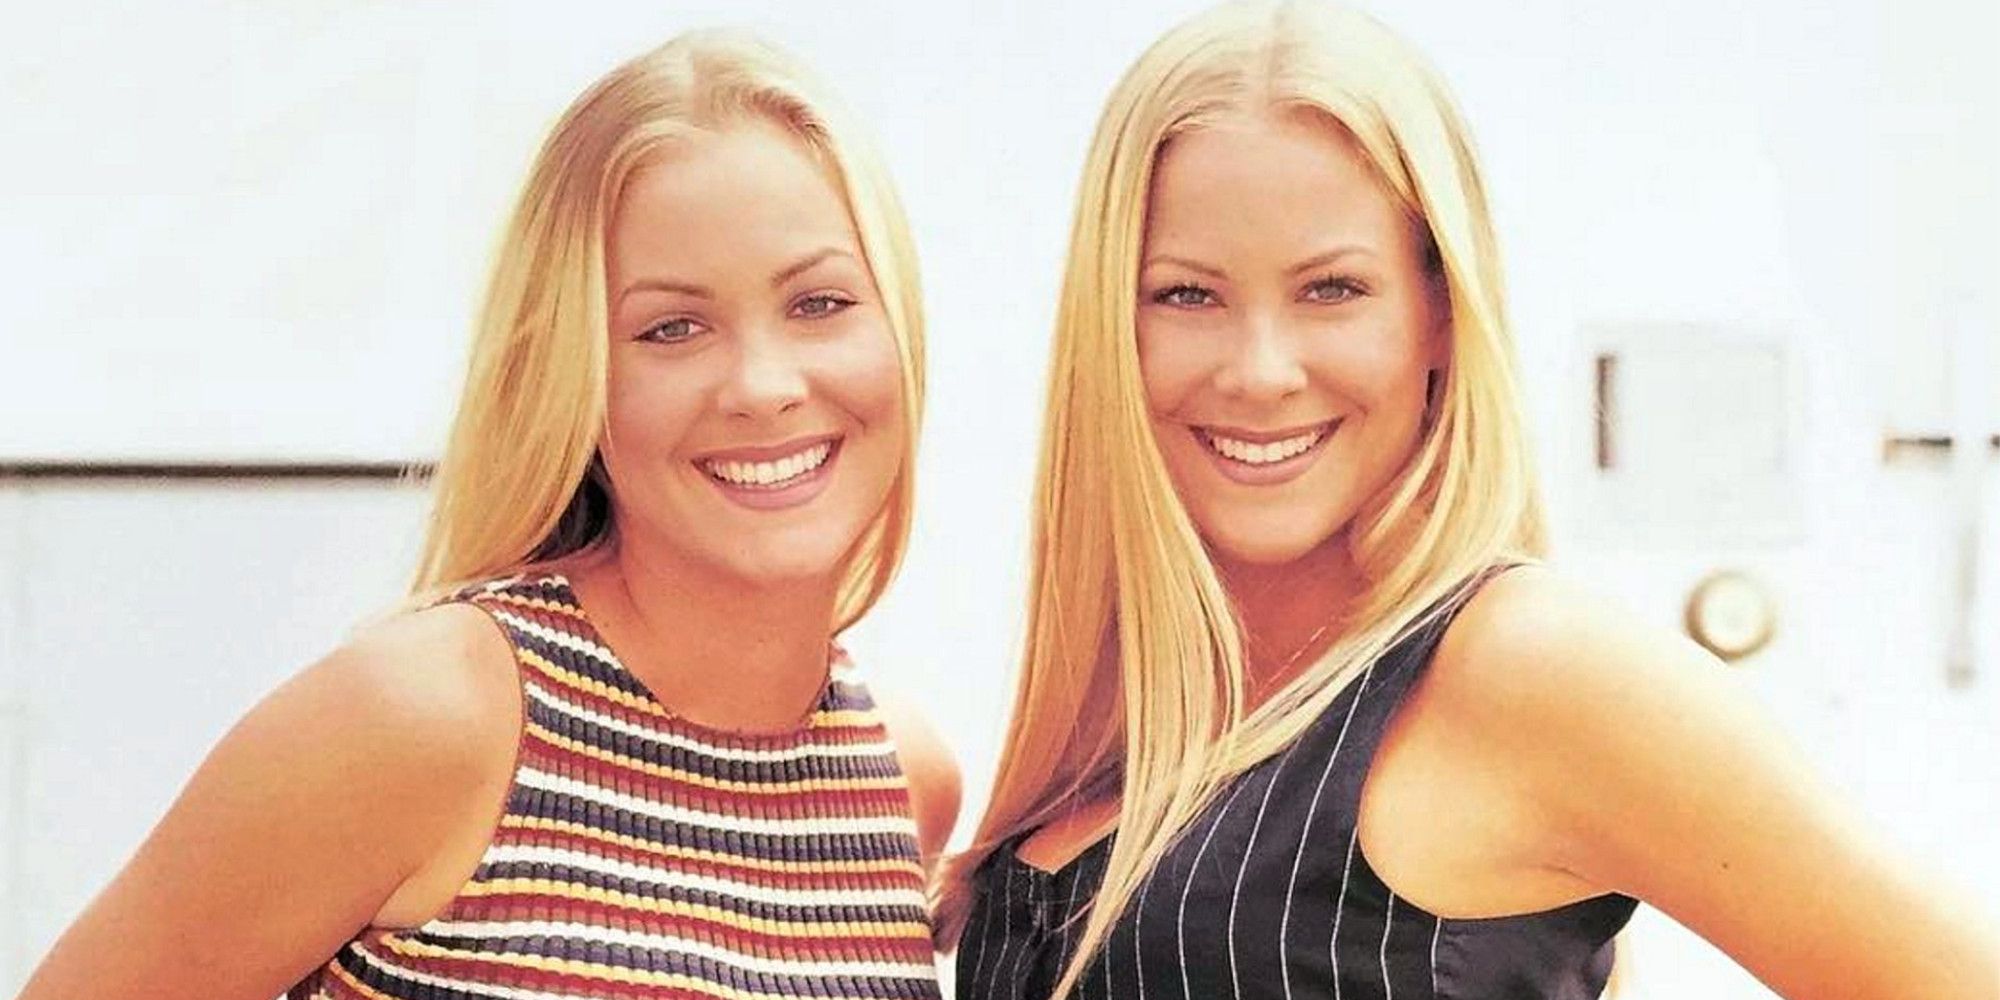 Brittany and Cynthia Daniel in Sweet Valley High